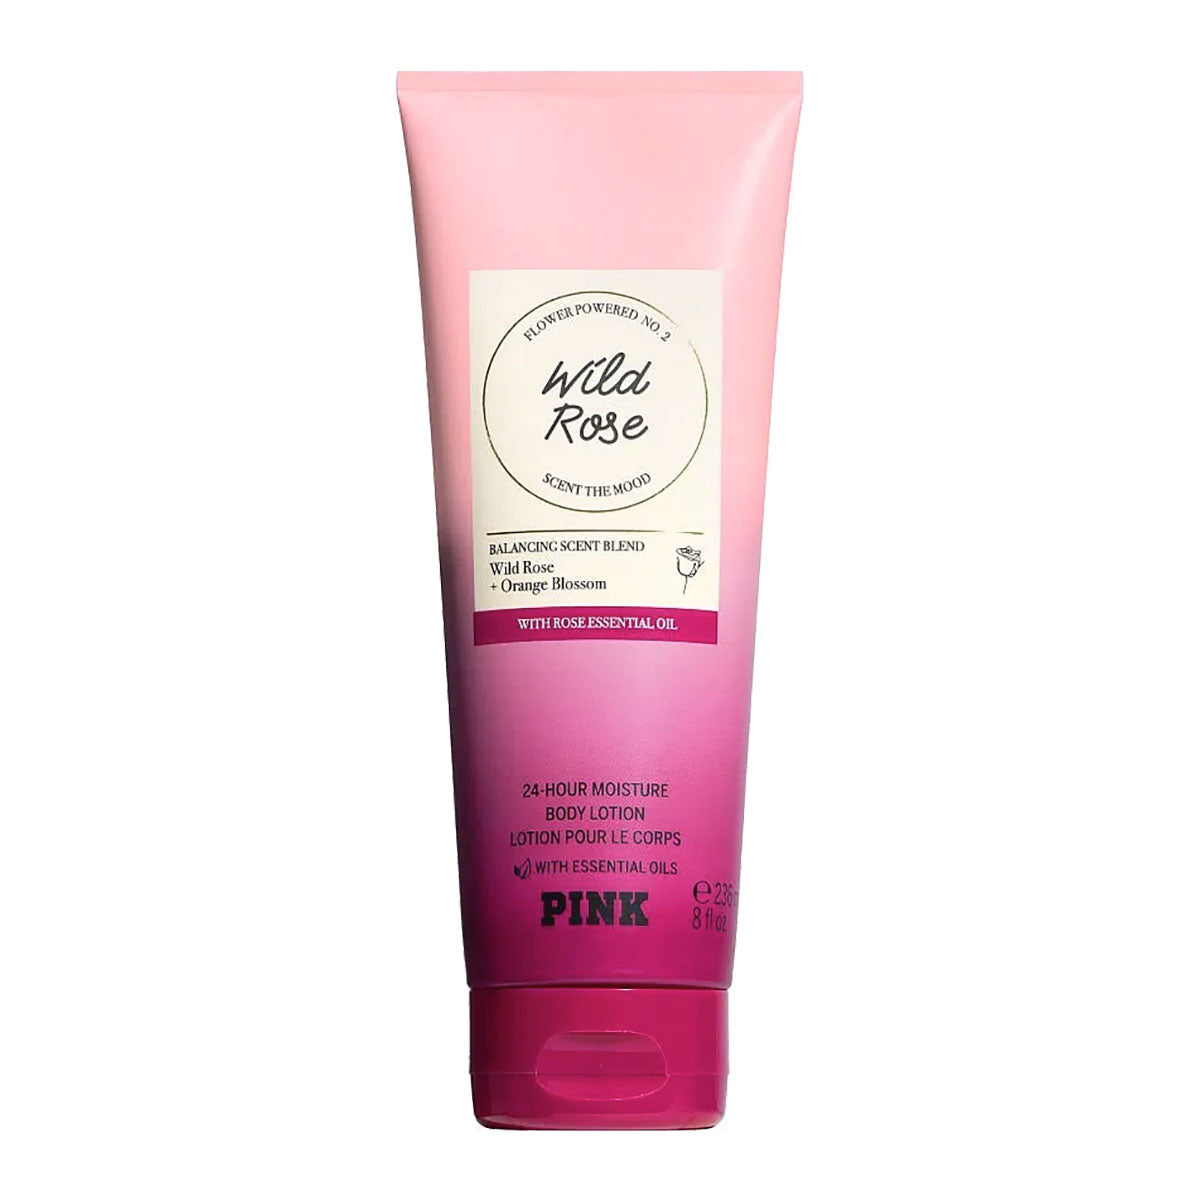 Victoria's Secret Pink Wild Rose Body Lotion with Essentials Oils